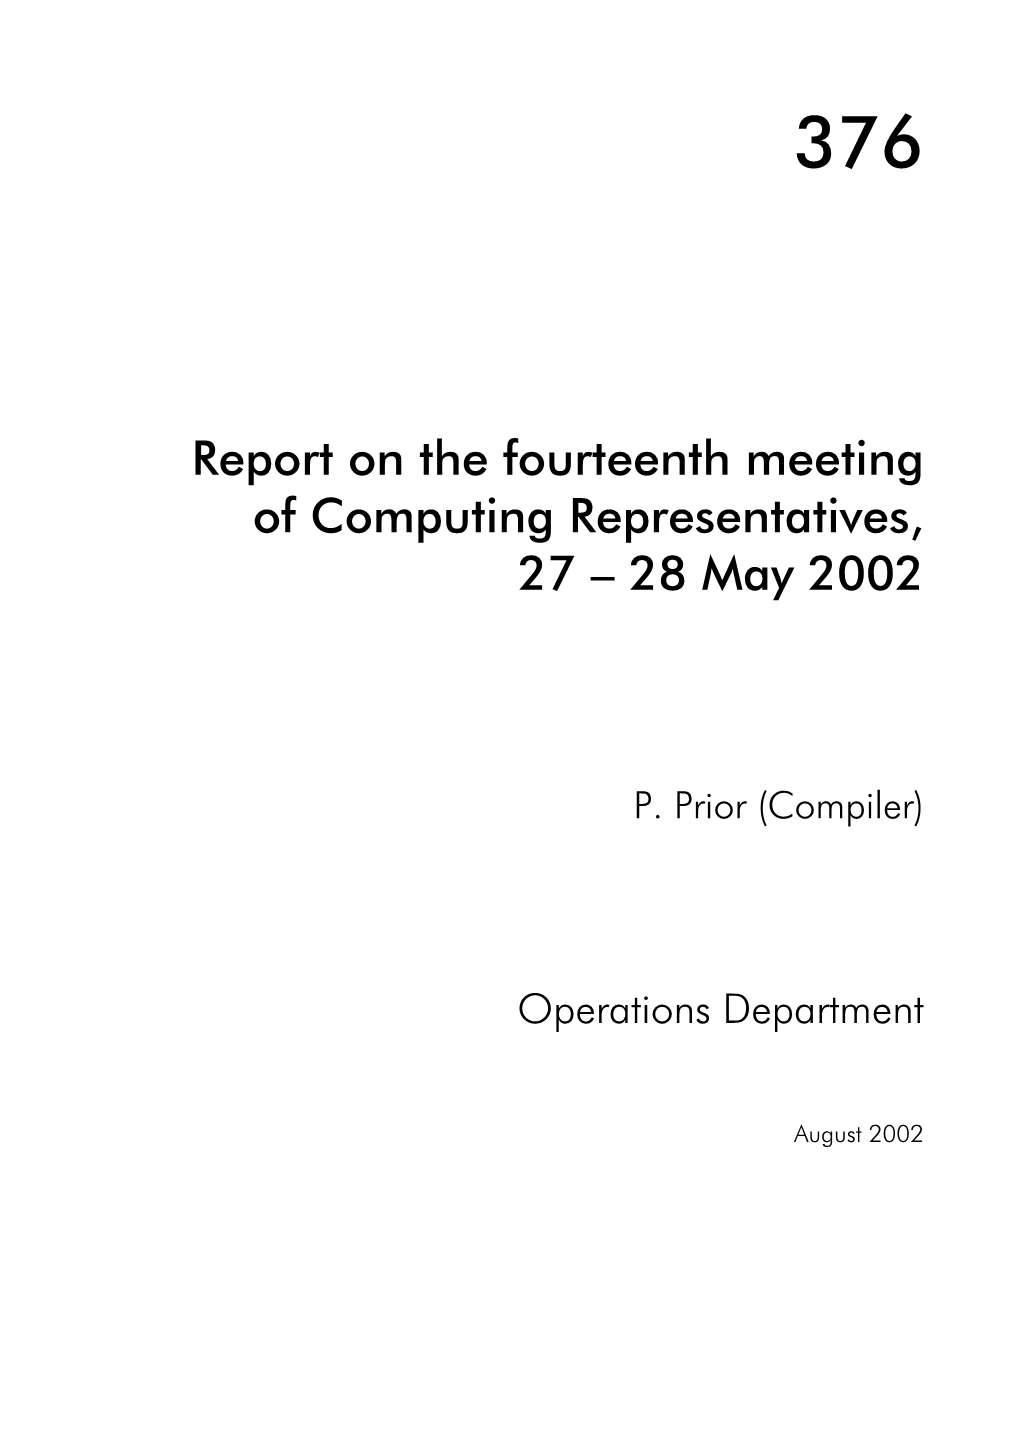 Report on the Fourteenth Meeting of Computing Representatives, 27 – 28 May 2002